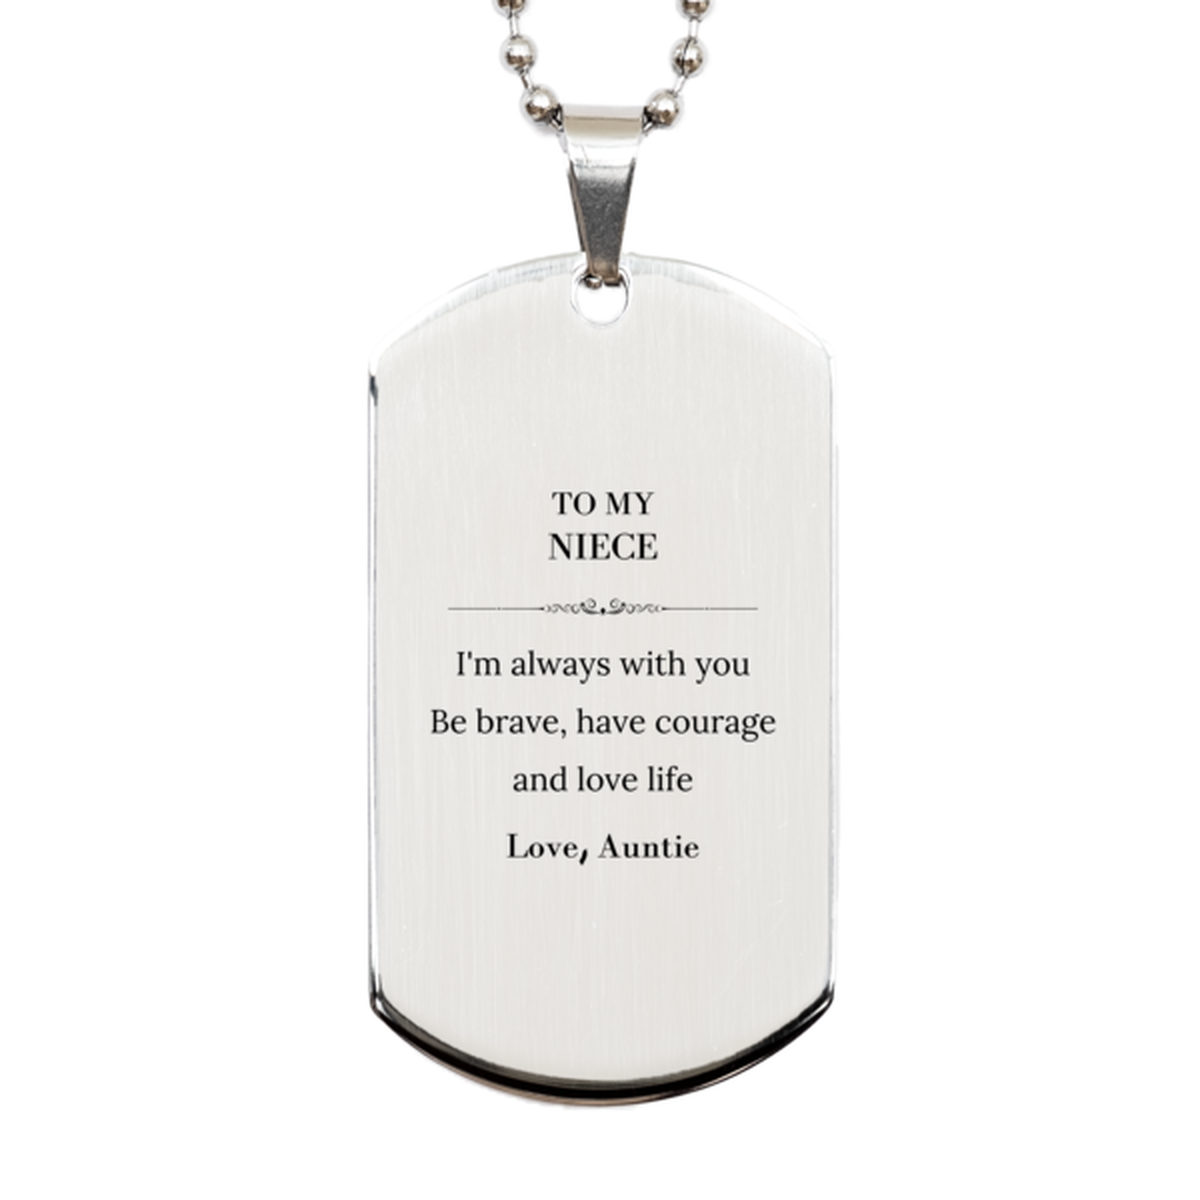 To My Niece Gifts from Auntie, Unique Silver Dog Tag Inspirational Christmas Birthday Graduation Gifts for Niece I'm always with you. Be brave, have courage and love life. Love, Auntie